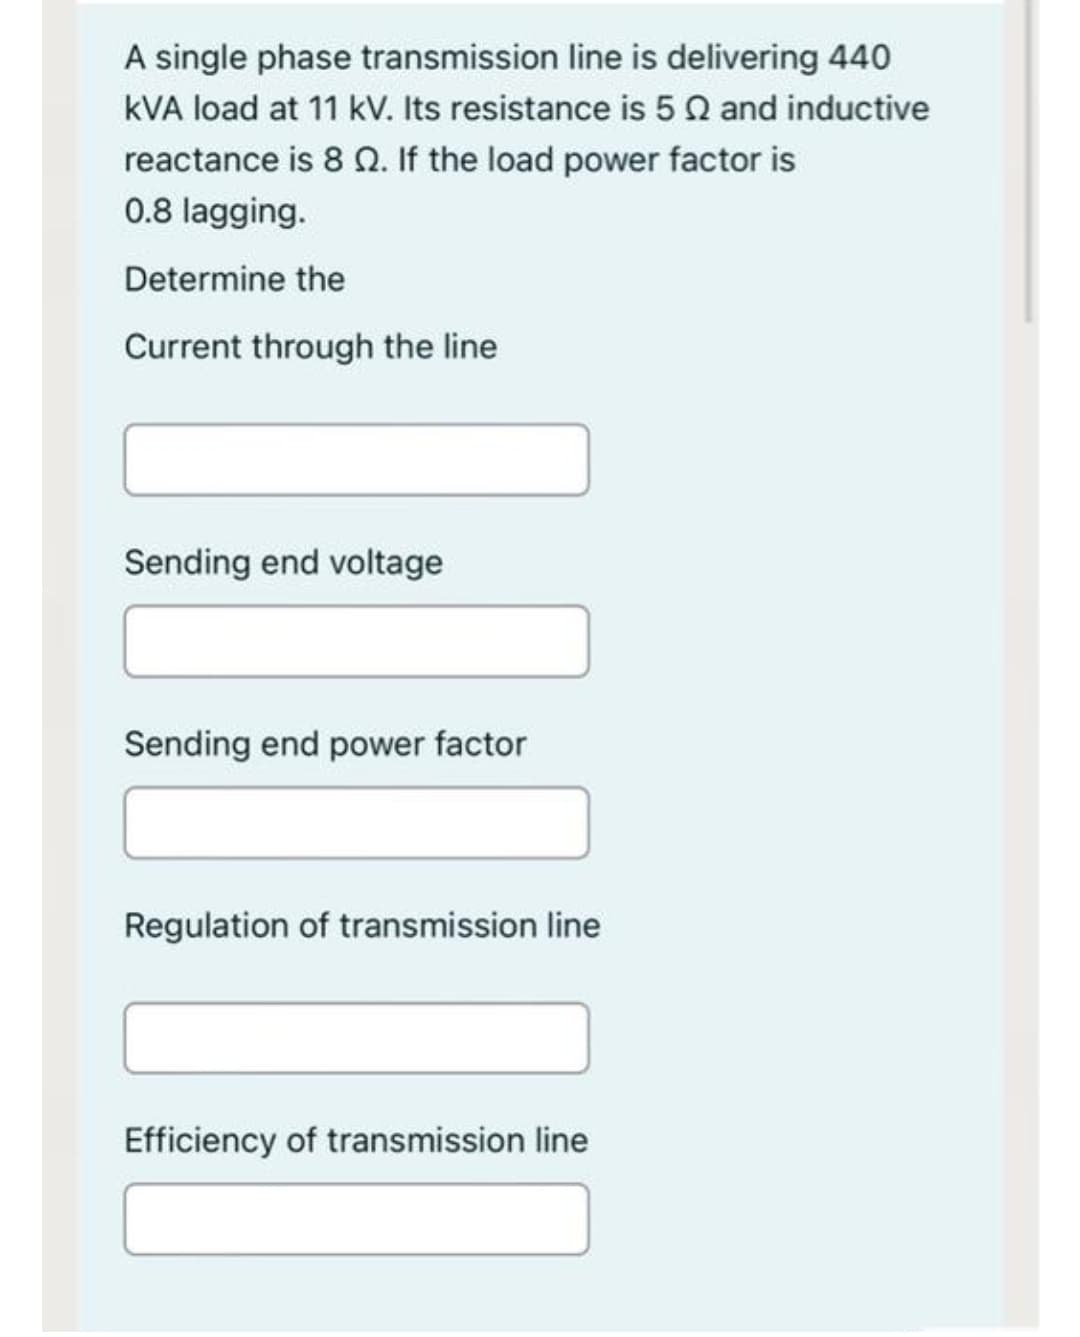 A single phase transmission line is delivering 440
kVA load at 11 kV. Its resistance is 5Q and inductive
reactance is 8 Q. If the load power factor is
0.8 lagging.
Determine the
Current through the line
Sending end voltage
Sending end power factor
Regulation of transmission line
Efficiency of transmission line
